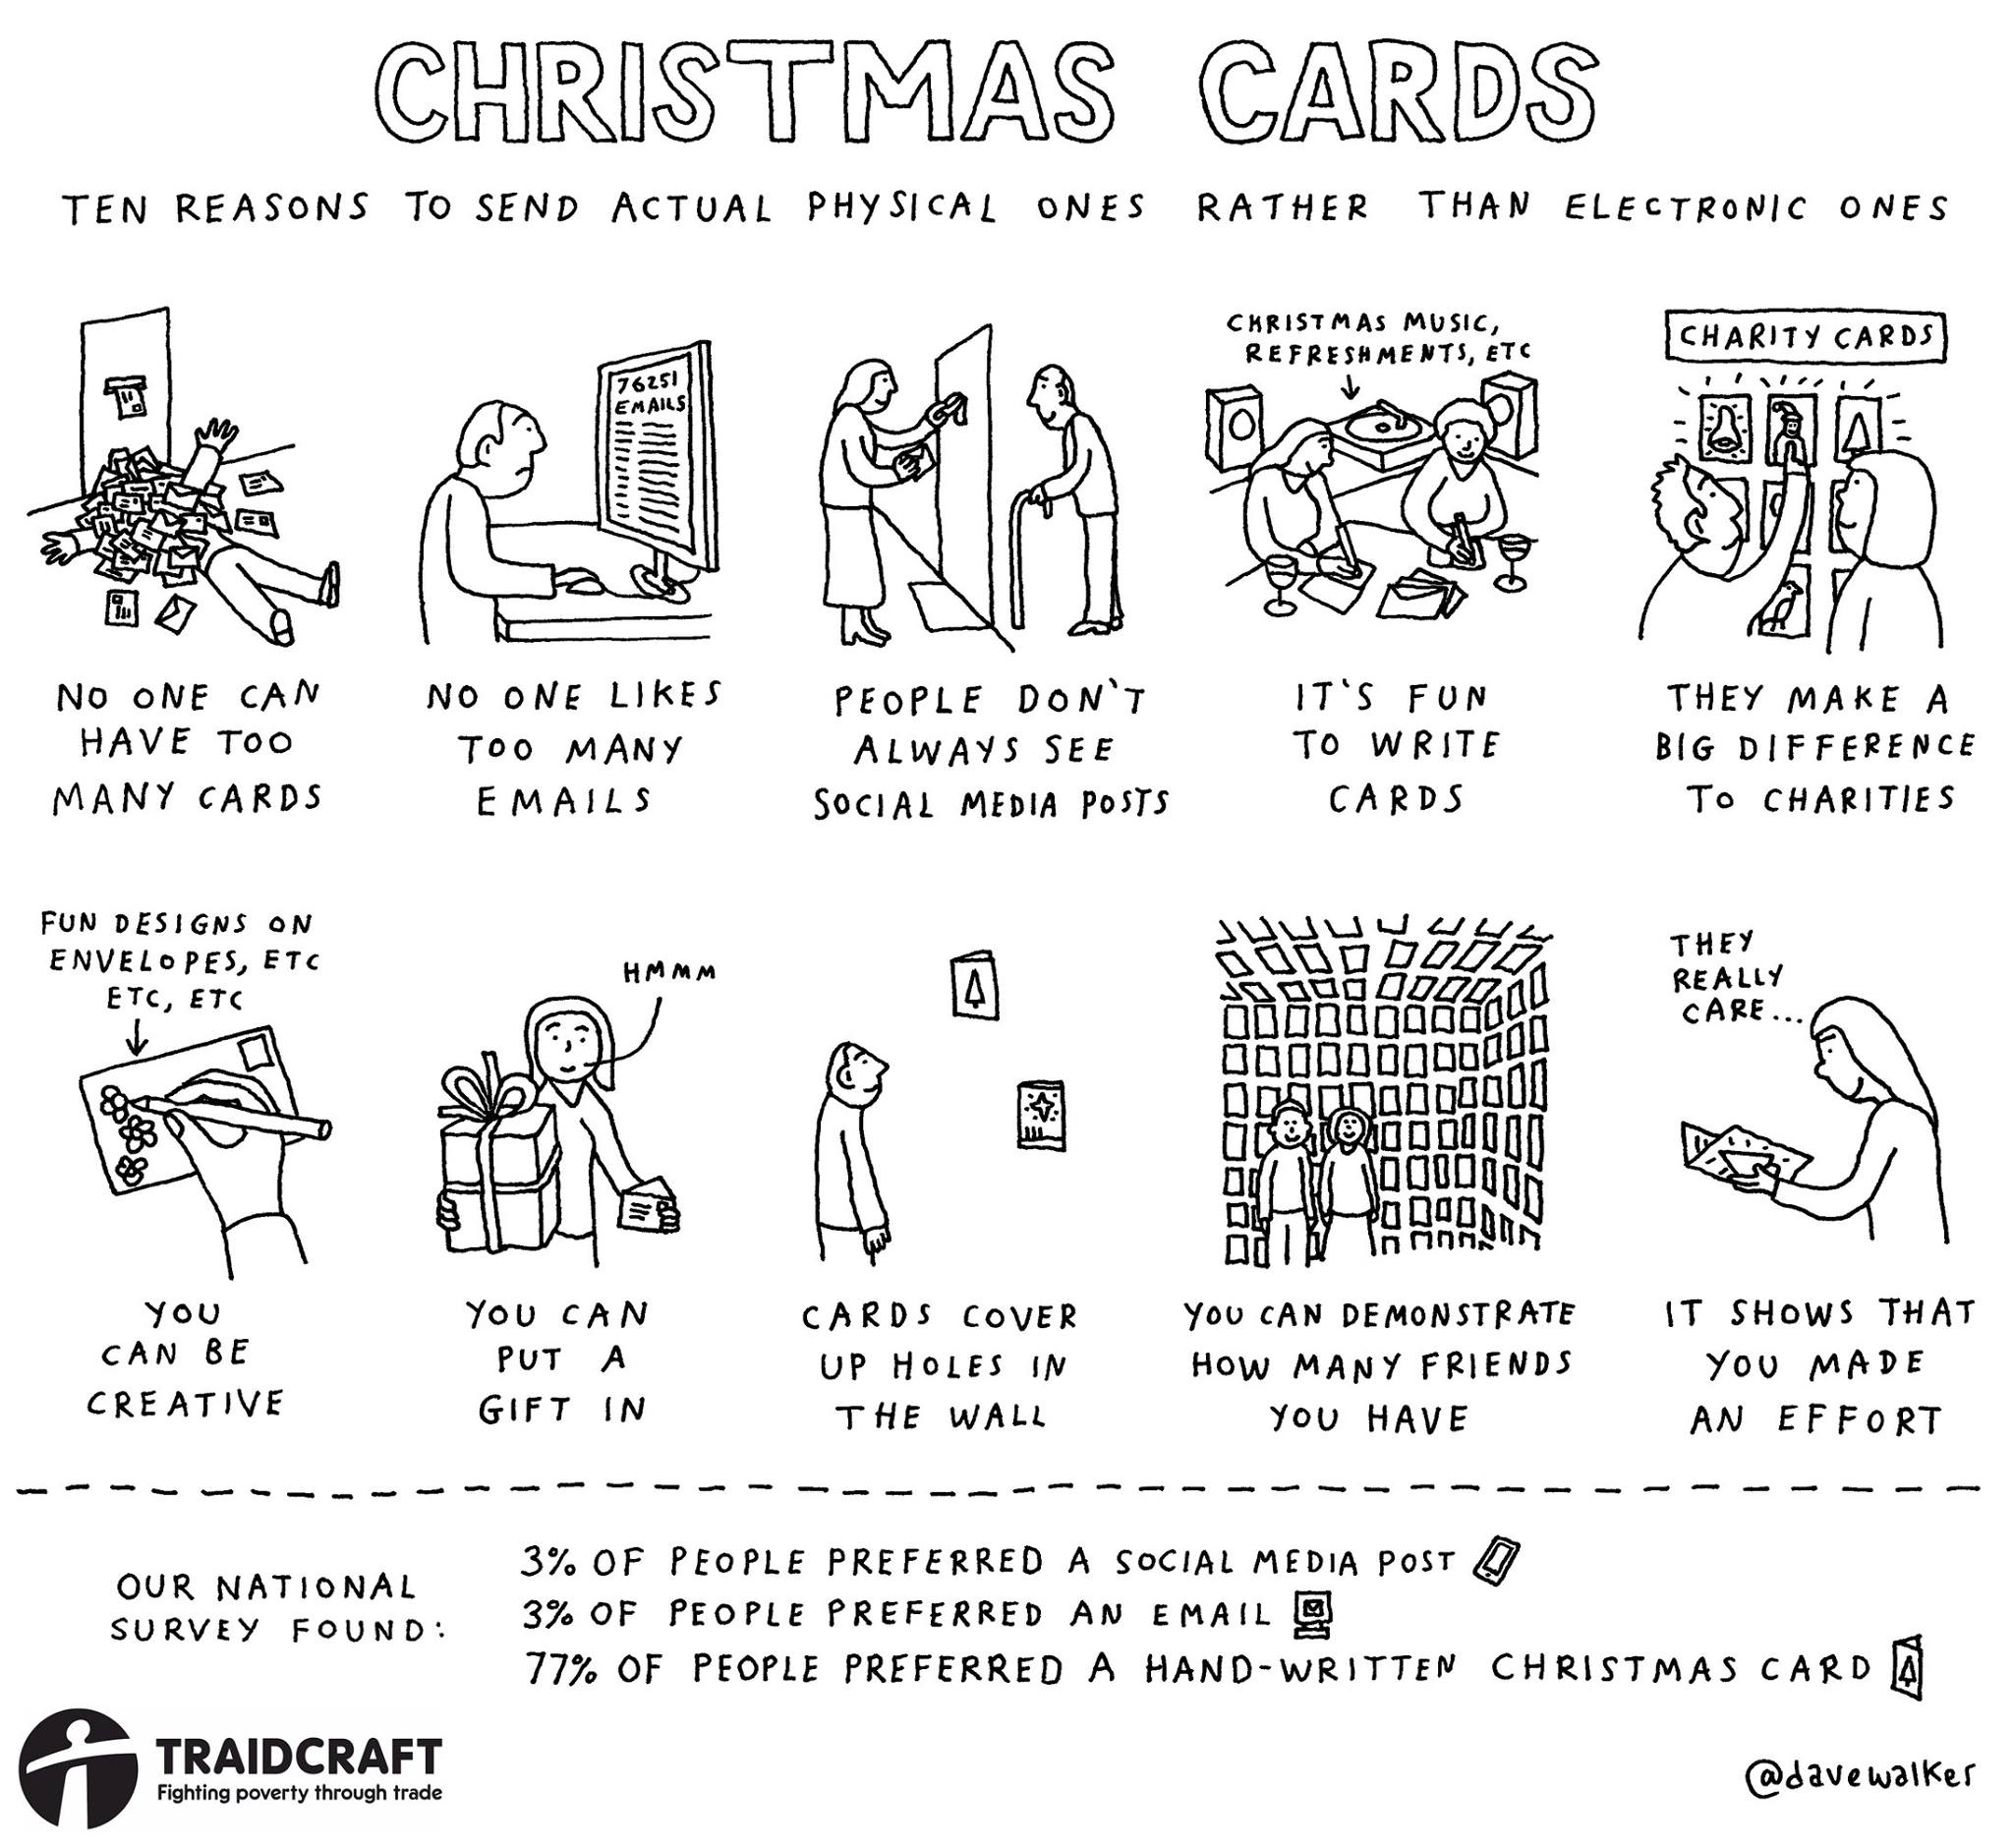 10 Reasons to send Christmas cards handwritten Christmas cards